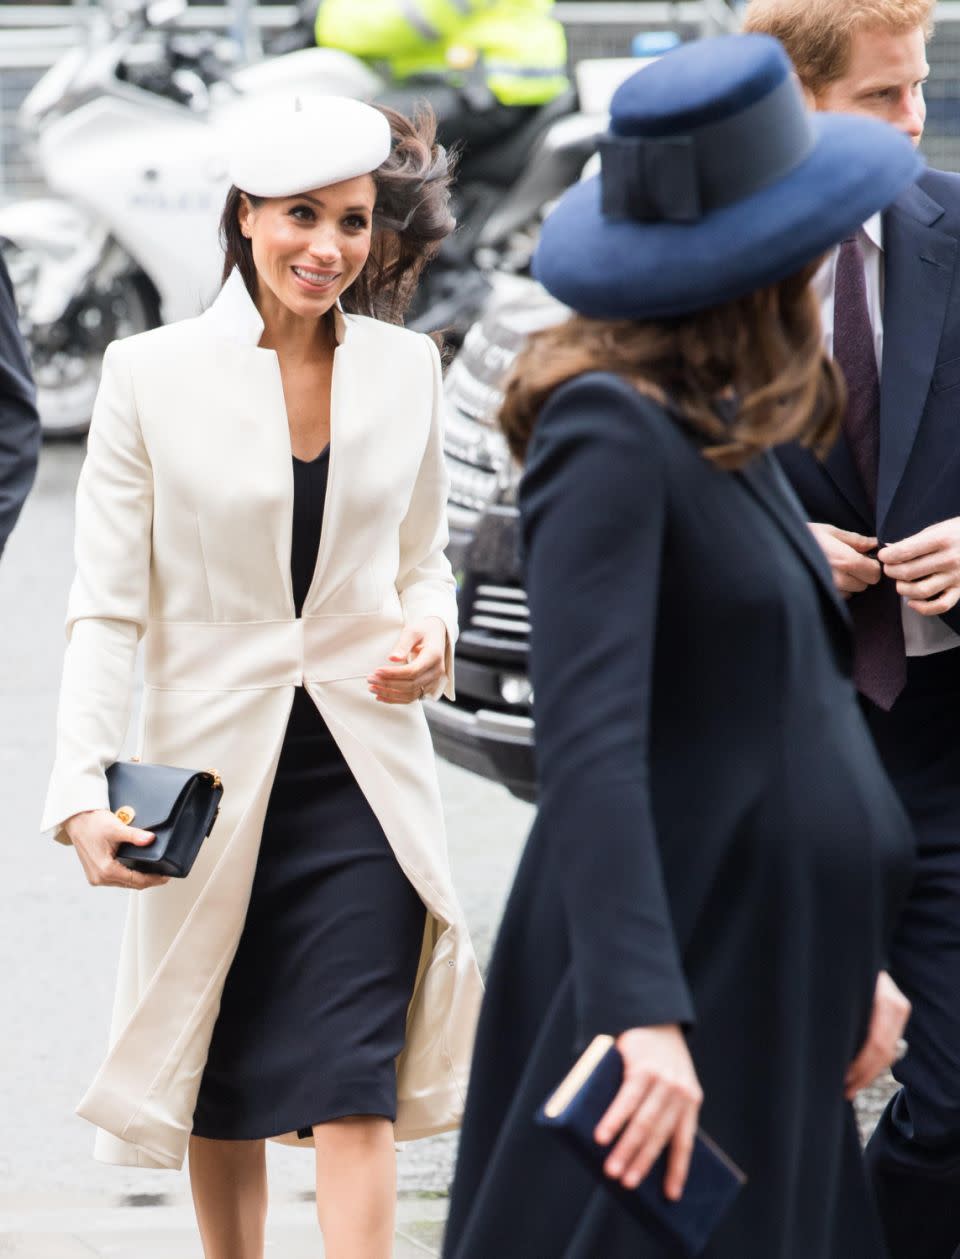 Its unusual for the royal ladies to have such an obvious outfit double up. Photo: Getty